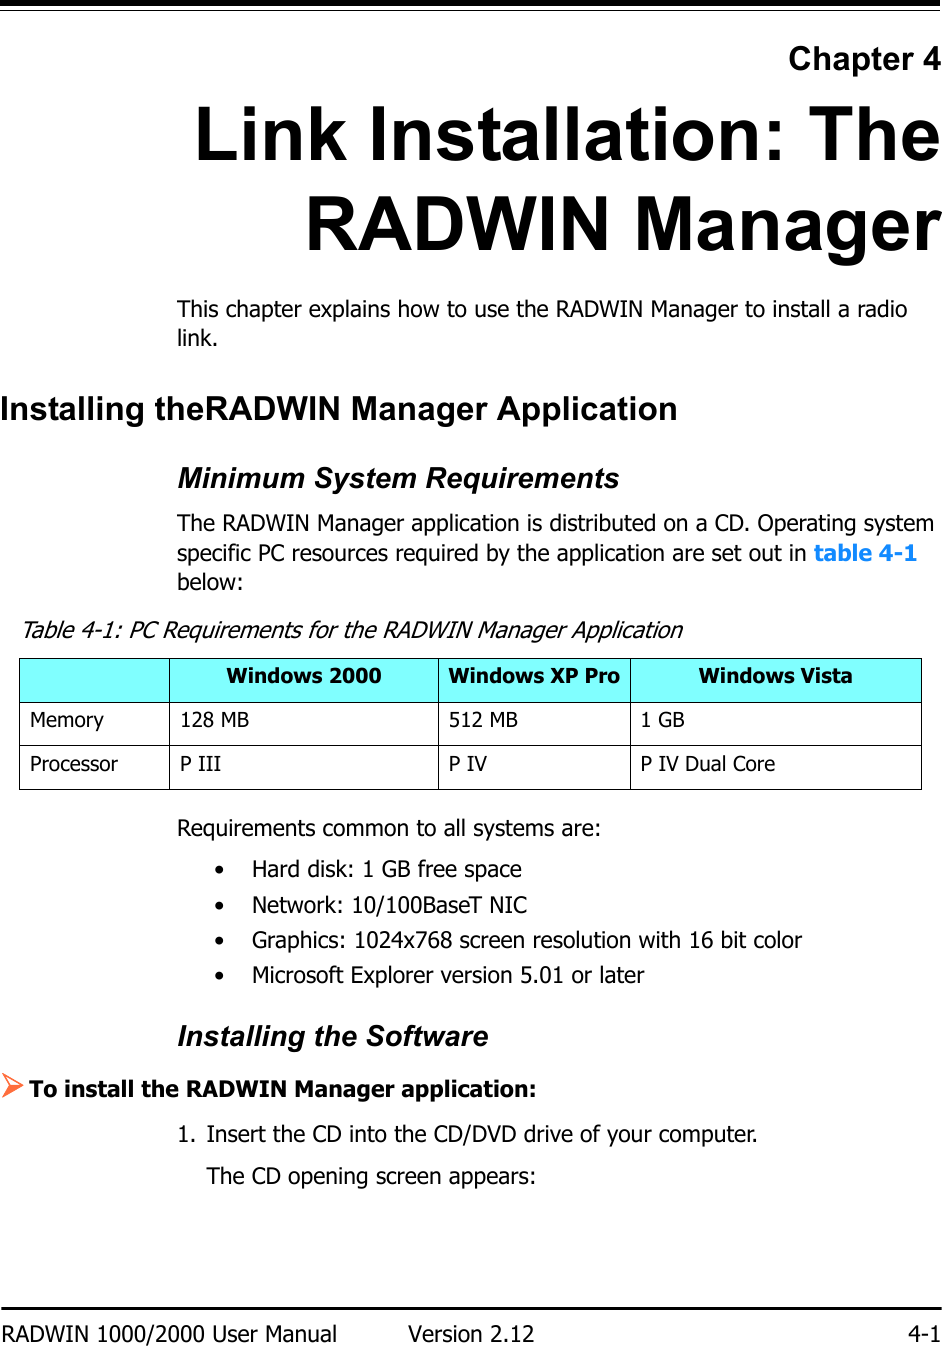 RADWIN 1000/2000 User Manual Version 2.12 4-1Chapter 4Link Installation: TheRADWIN ManagerThis chapter explains how to use the RADWIN Manager to install a radio link.Installing theRADWIN Manager ApplicationMinimum System RequirementsThe RADWIN Manager application is distributed on a CD. Operating system specific PC resources required by the application are set out in table 4-1 below:Requirements common to all systems are:• Hard disk: 1 GB free space• Network: 10/100BaseT NIC• Graphics: 1024x768 screen resolution with 16 bit color• Microsoft Explorer version 5.01 or laterInstalling the Software¾To install the RADWIN Manager application:1. Insert the CD into the CD/DVD drive of your computer.The CD opening screen appears:Table 4-1: PC Requirements for the RADWIN Manager ApplicationWindows 2000 Windows XP Pro Windows VistaMemory 128 MB 512 MB 1 GBProcessor P III P IV P IV Dual Core